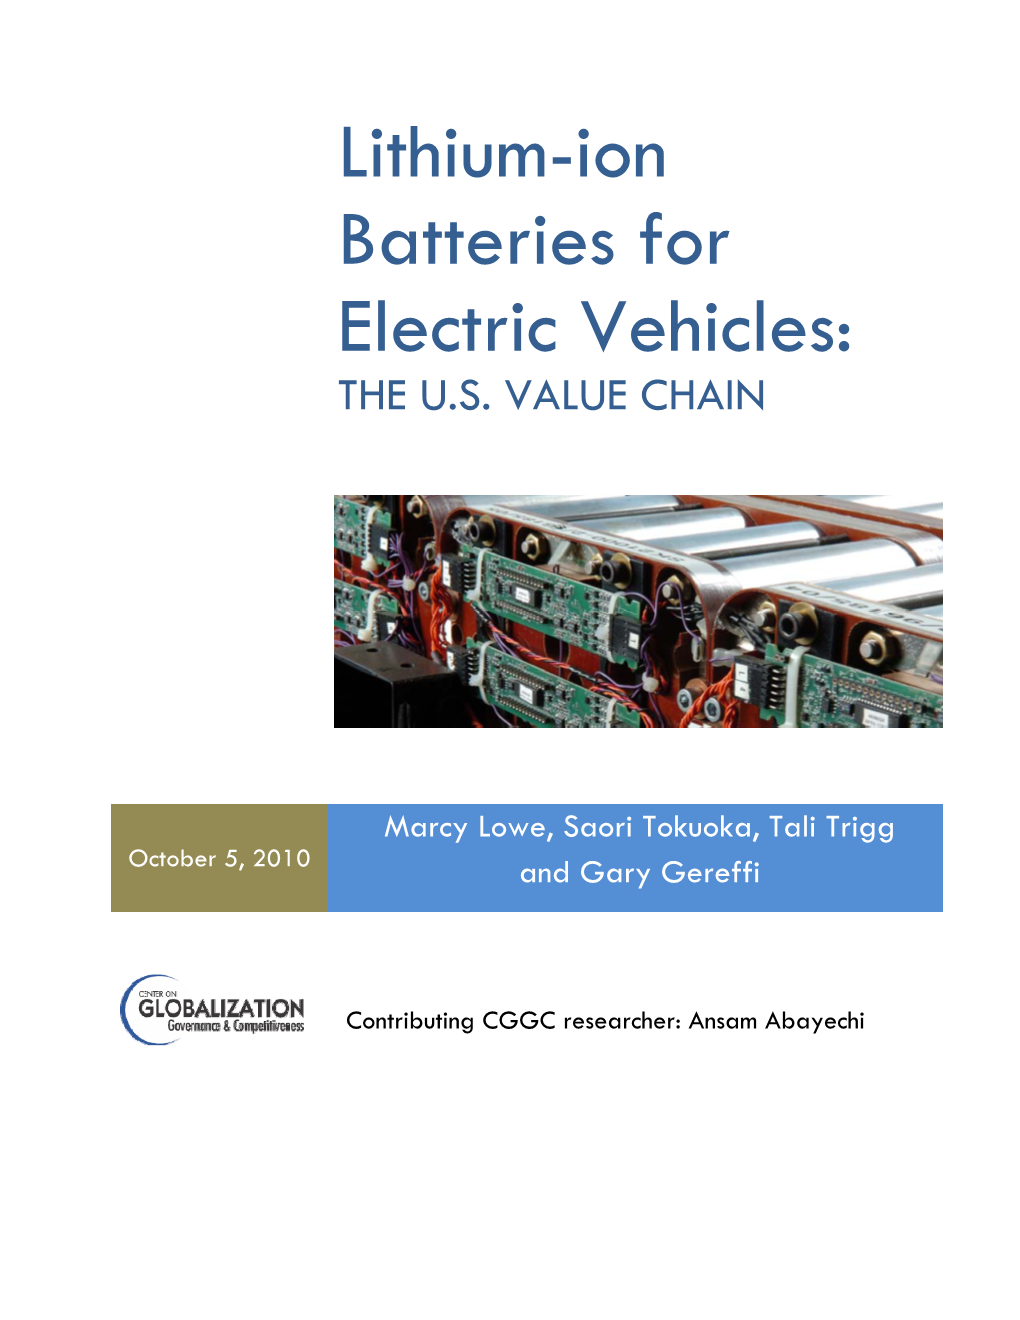 Lithium-Ion Batteries for Electric Vehicles: the U.S